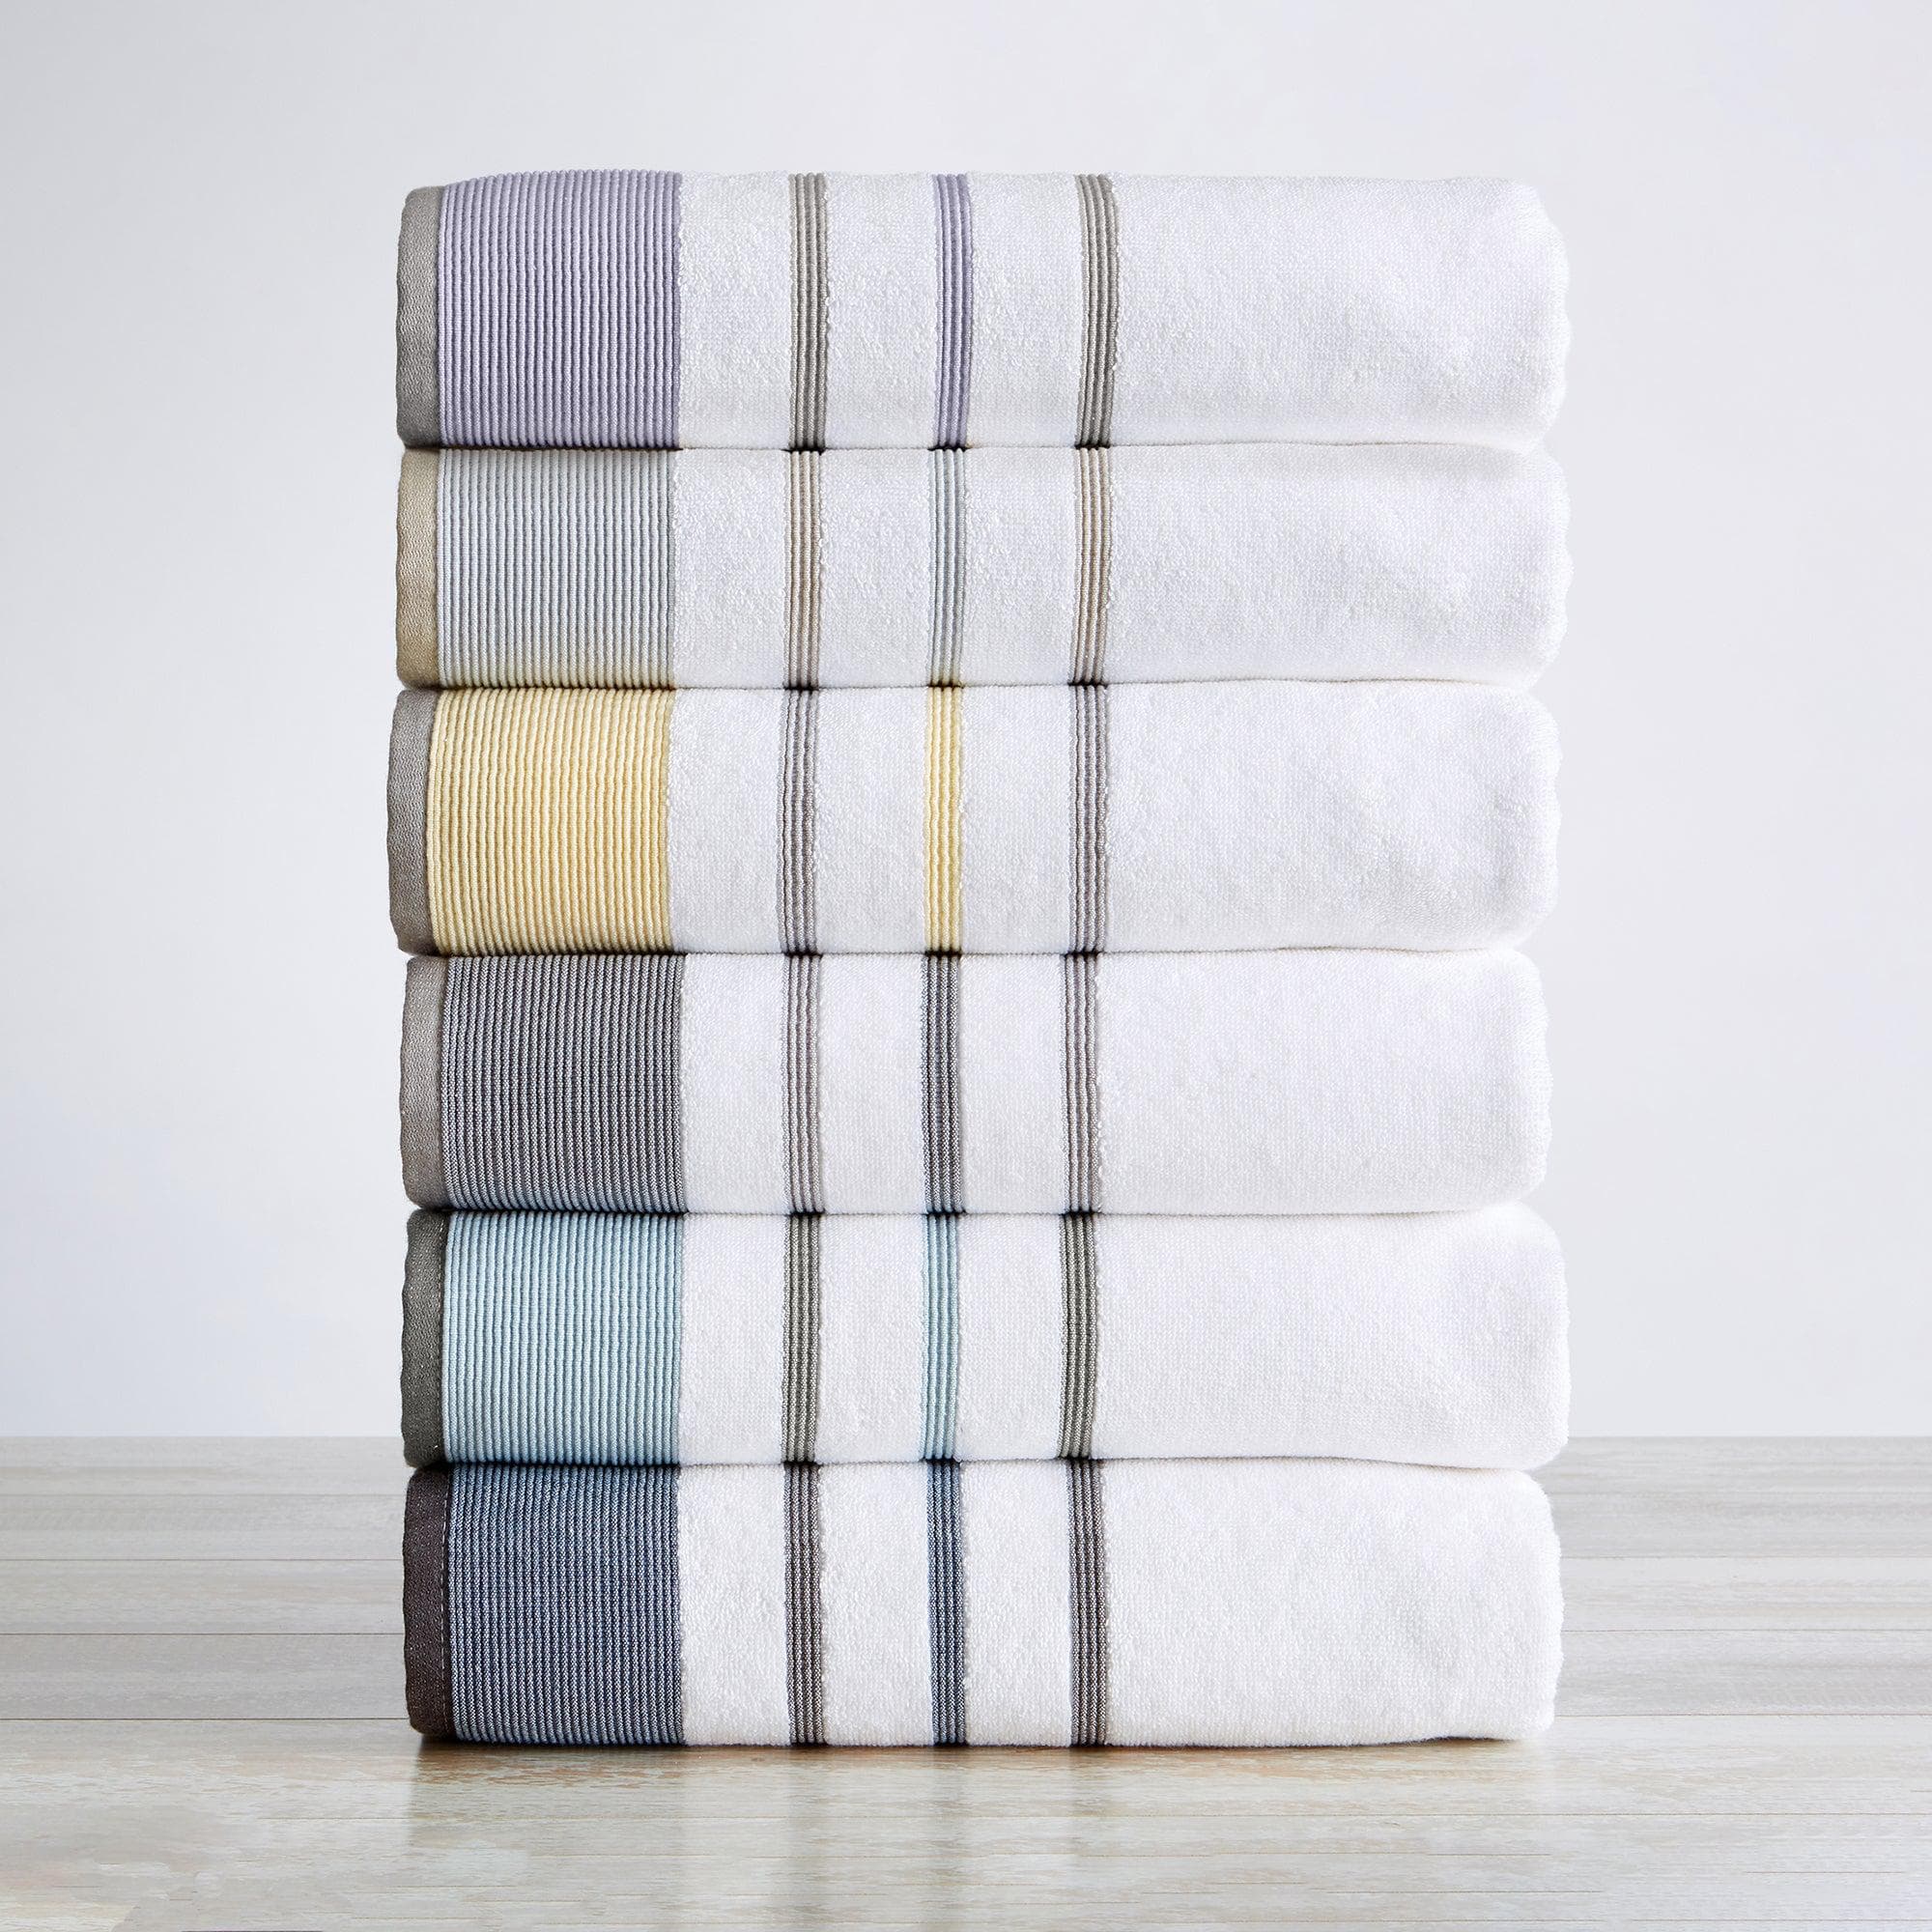 Great Bay Home Cotton Waffle Weave Quick-Dry Towel Set (Hand Towel